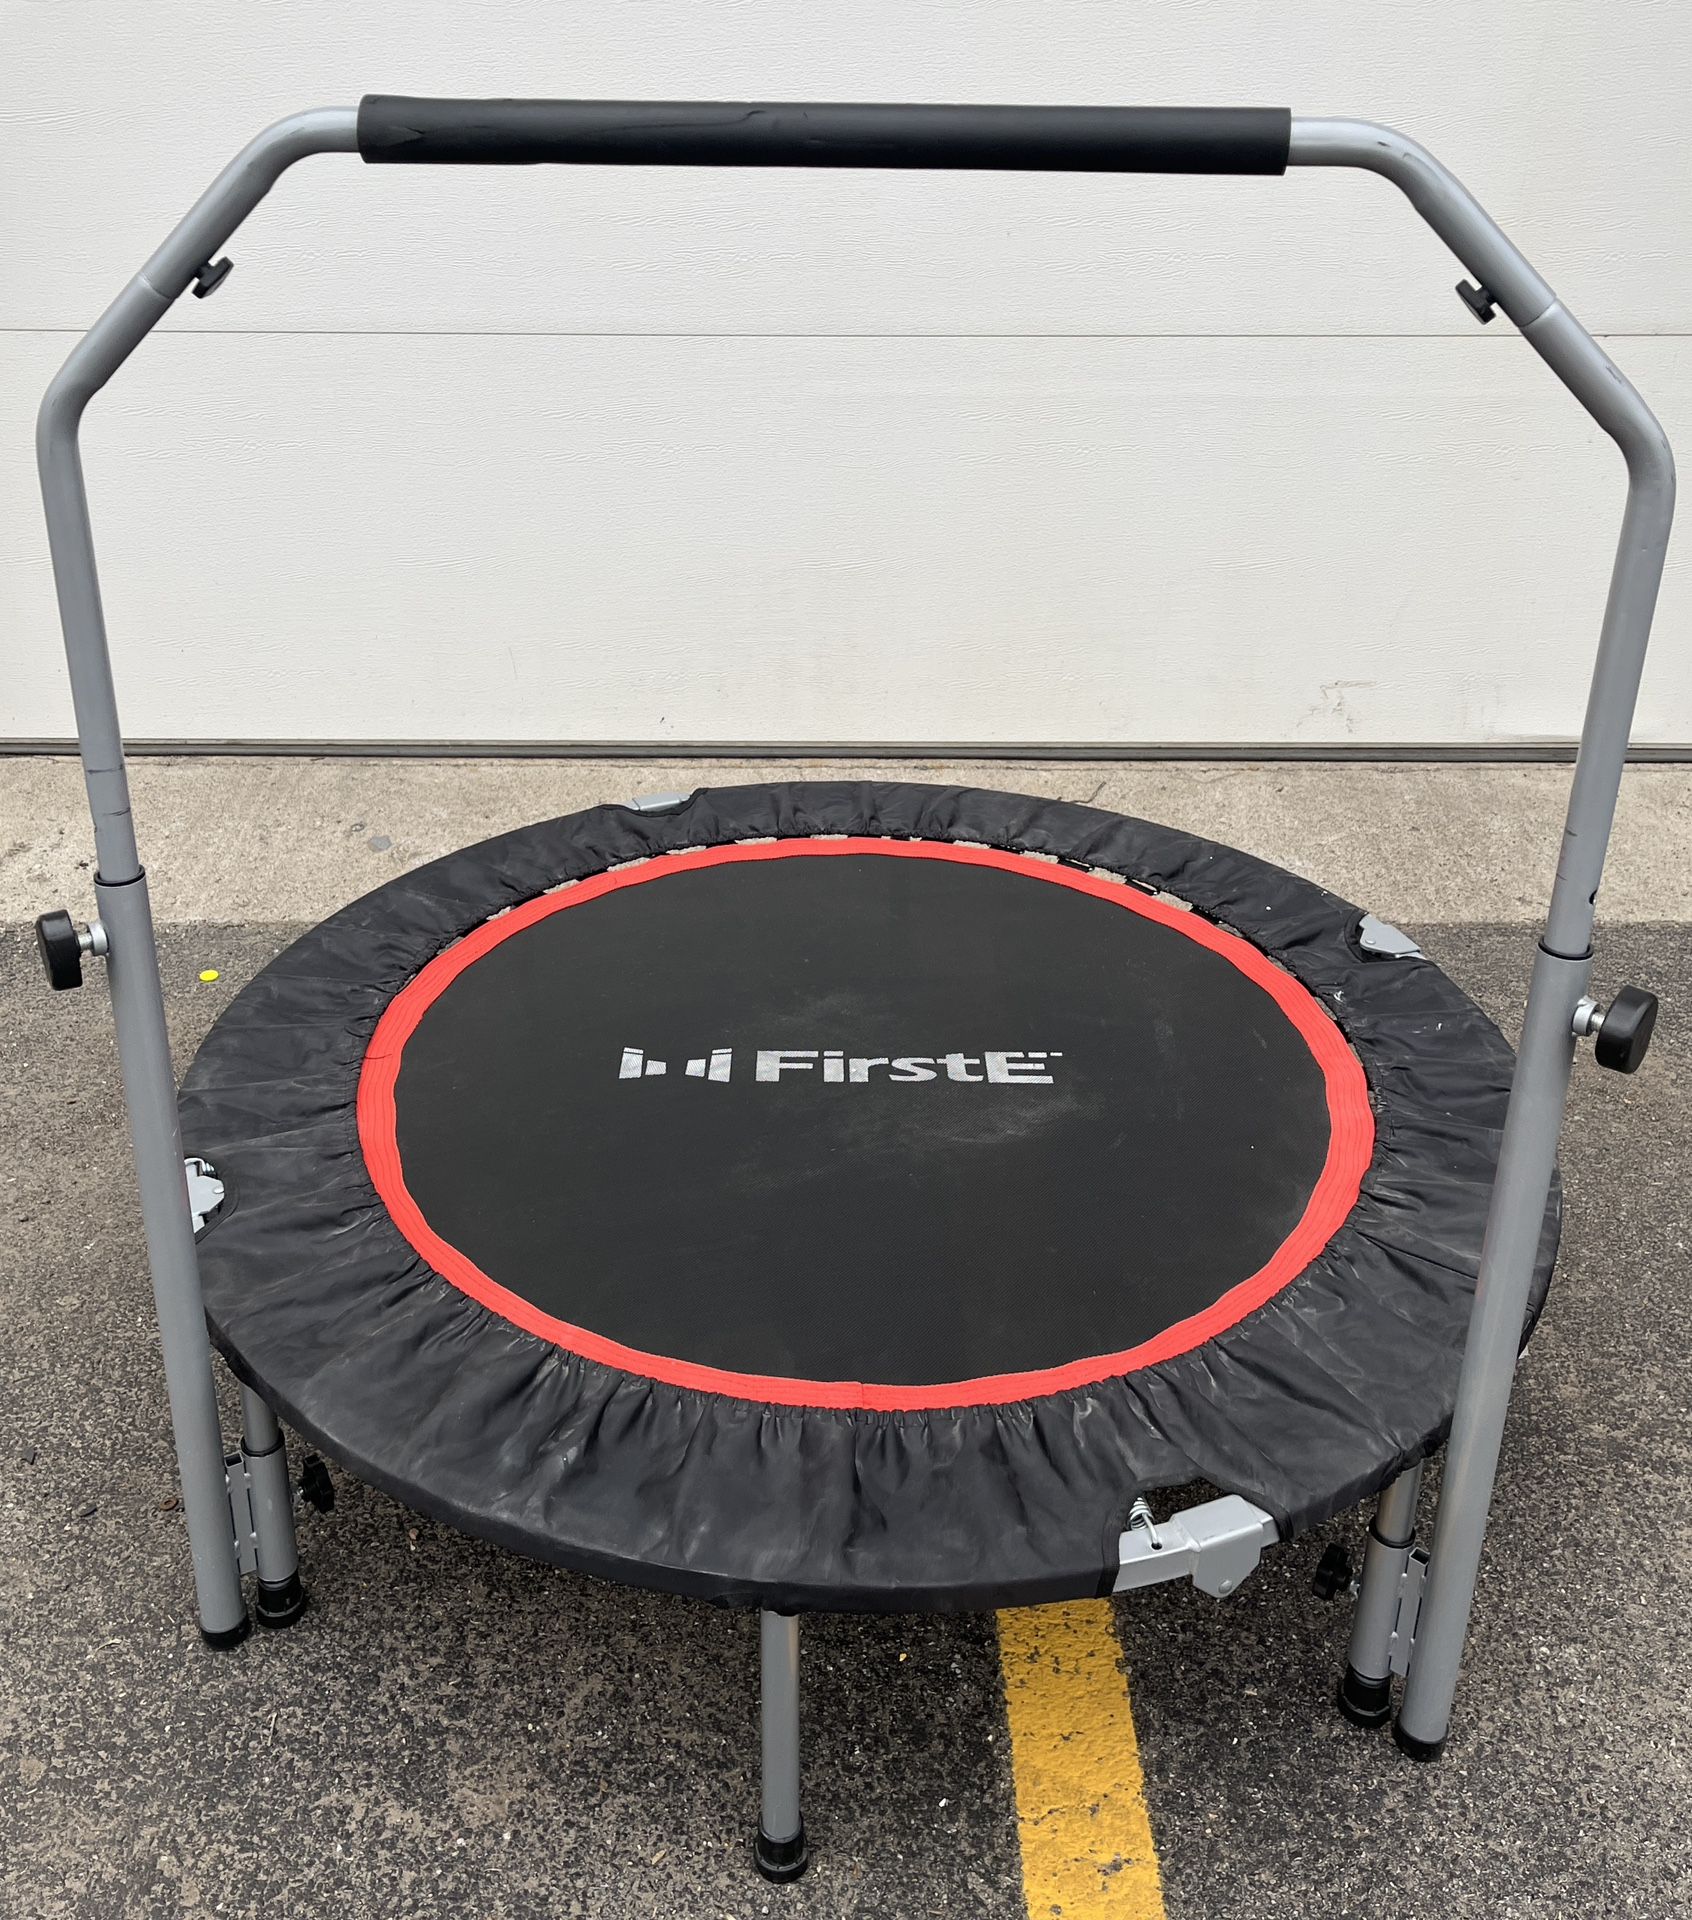 48" Foldable Fitness Trampoline with 4 Level Adjustable Heights Foam Handrail, Jump Trampoline. Max Load 440lbs